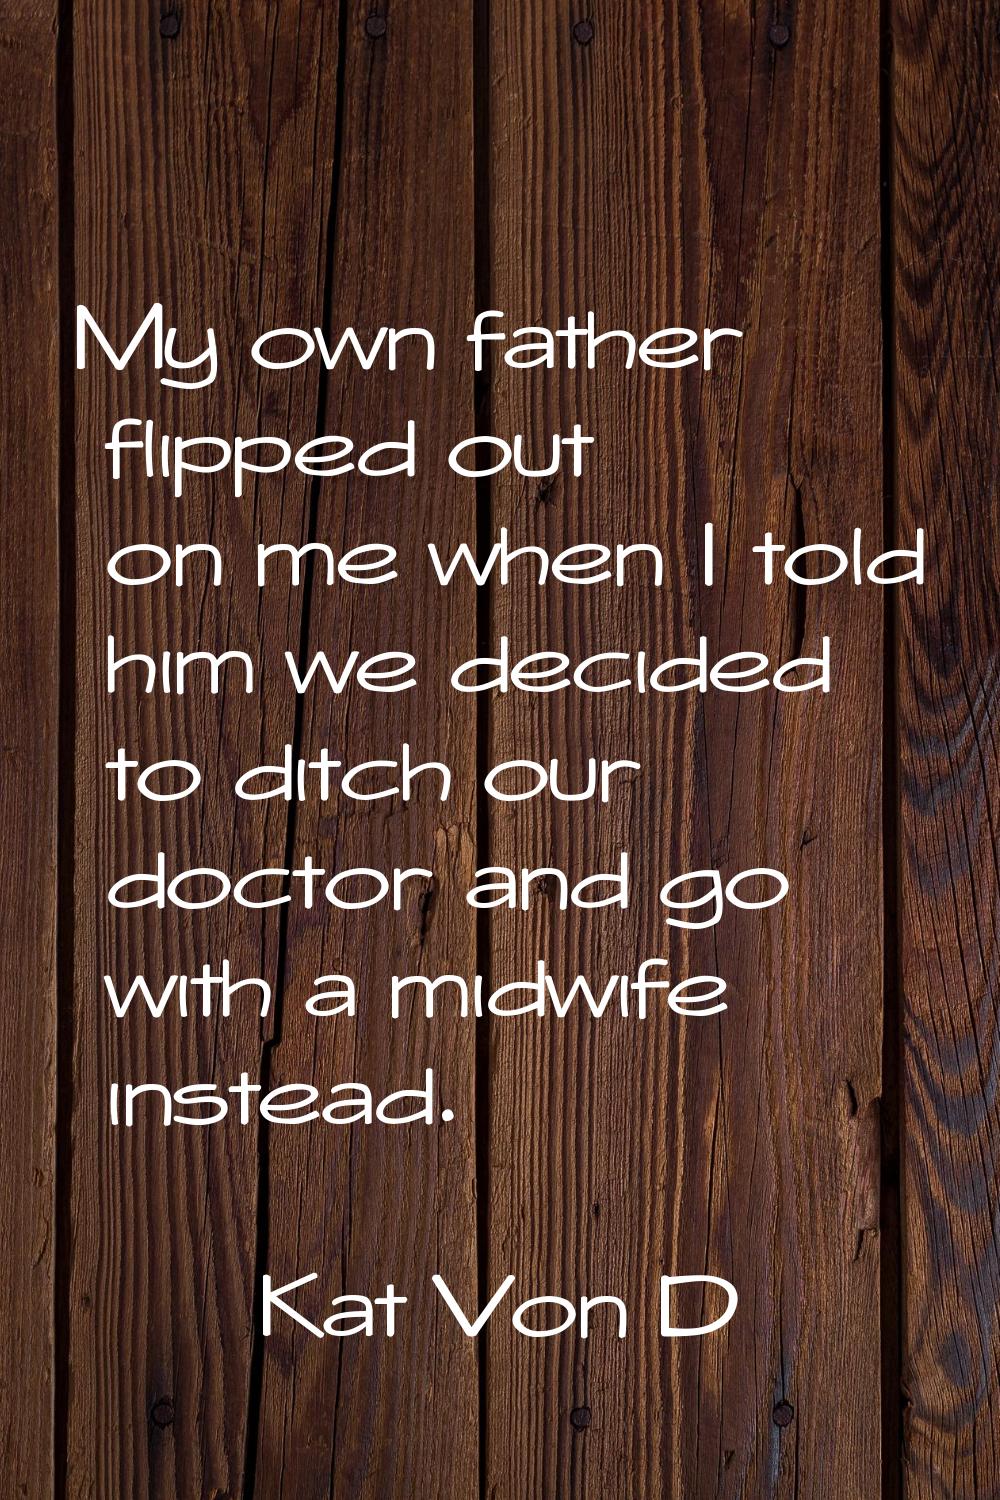 My own father flipped out on me when I told him we decided to ditch our doctor and go with a midwif